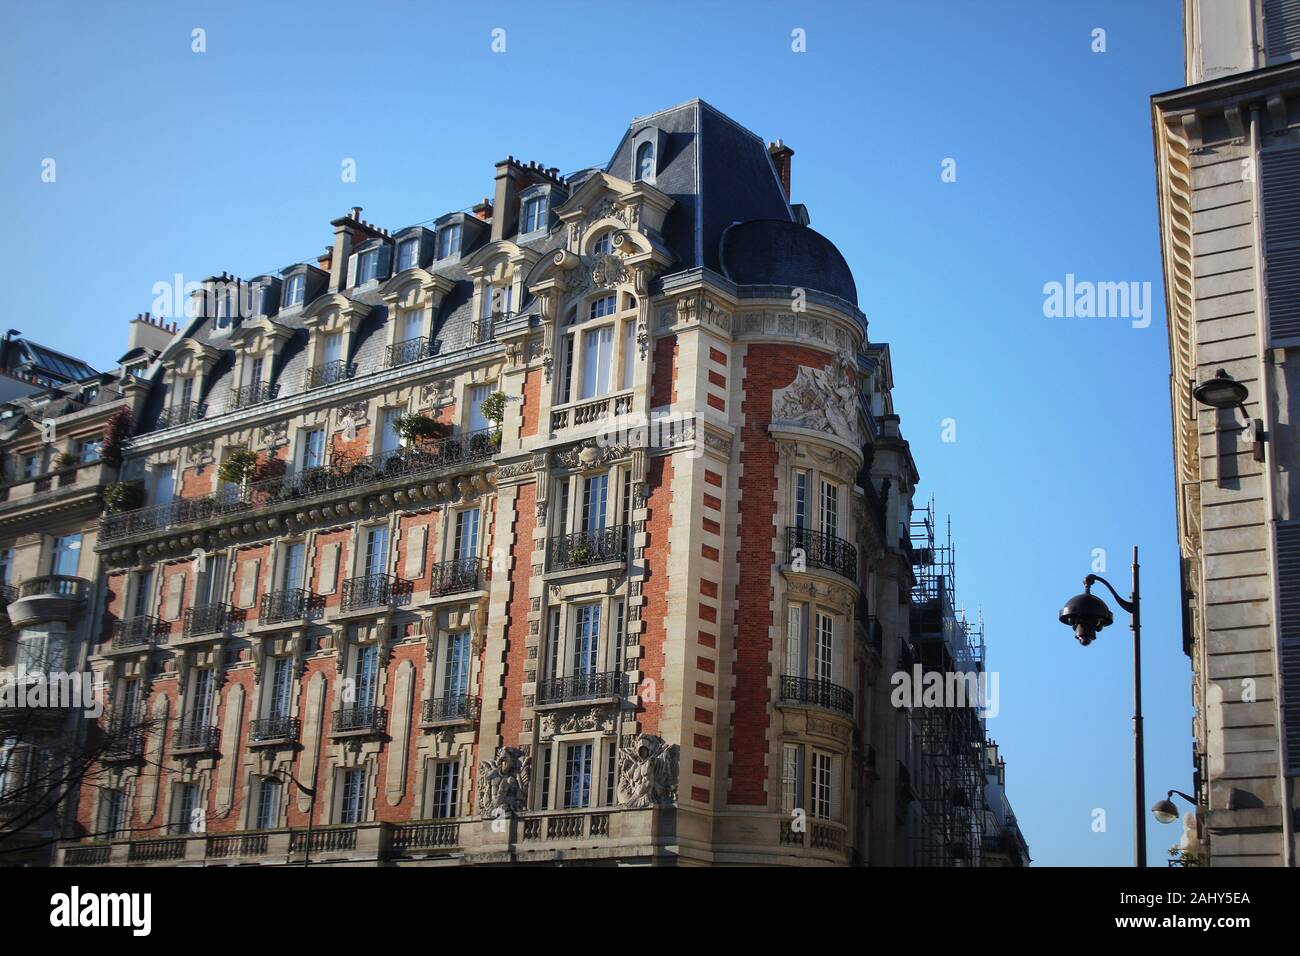 Exterior of a multi-storey historical townhouse in Paris with an ornate ...